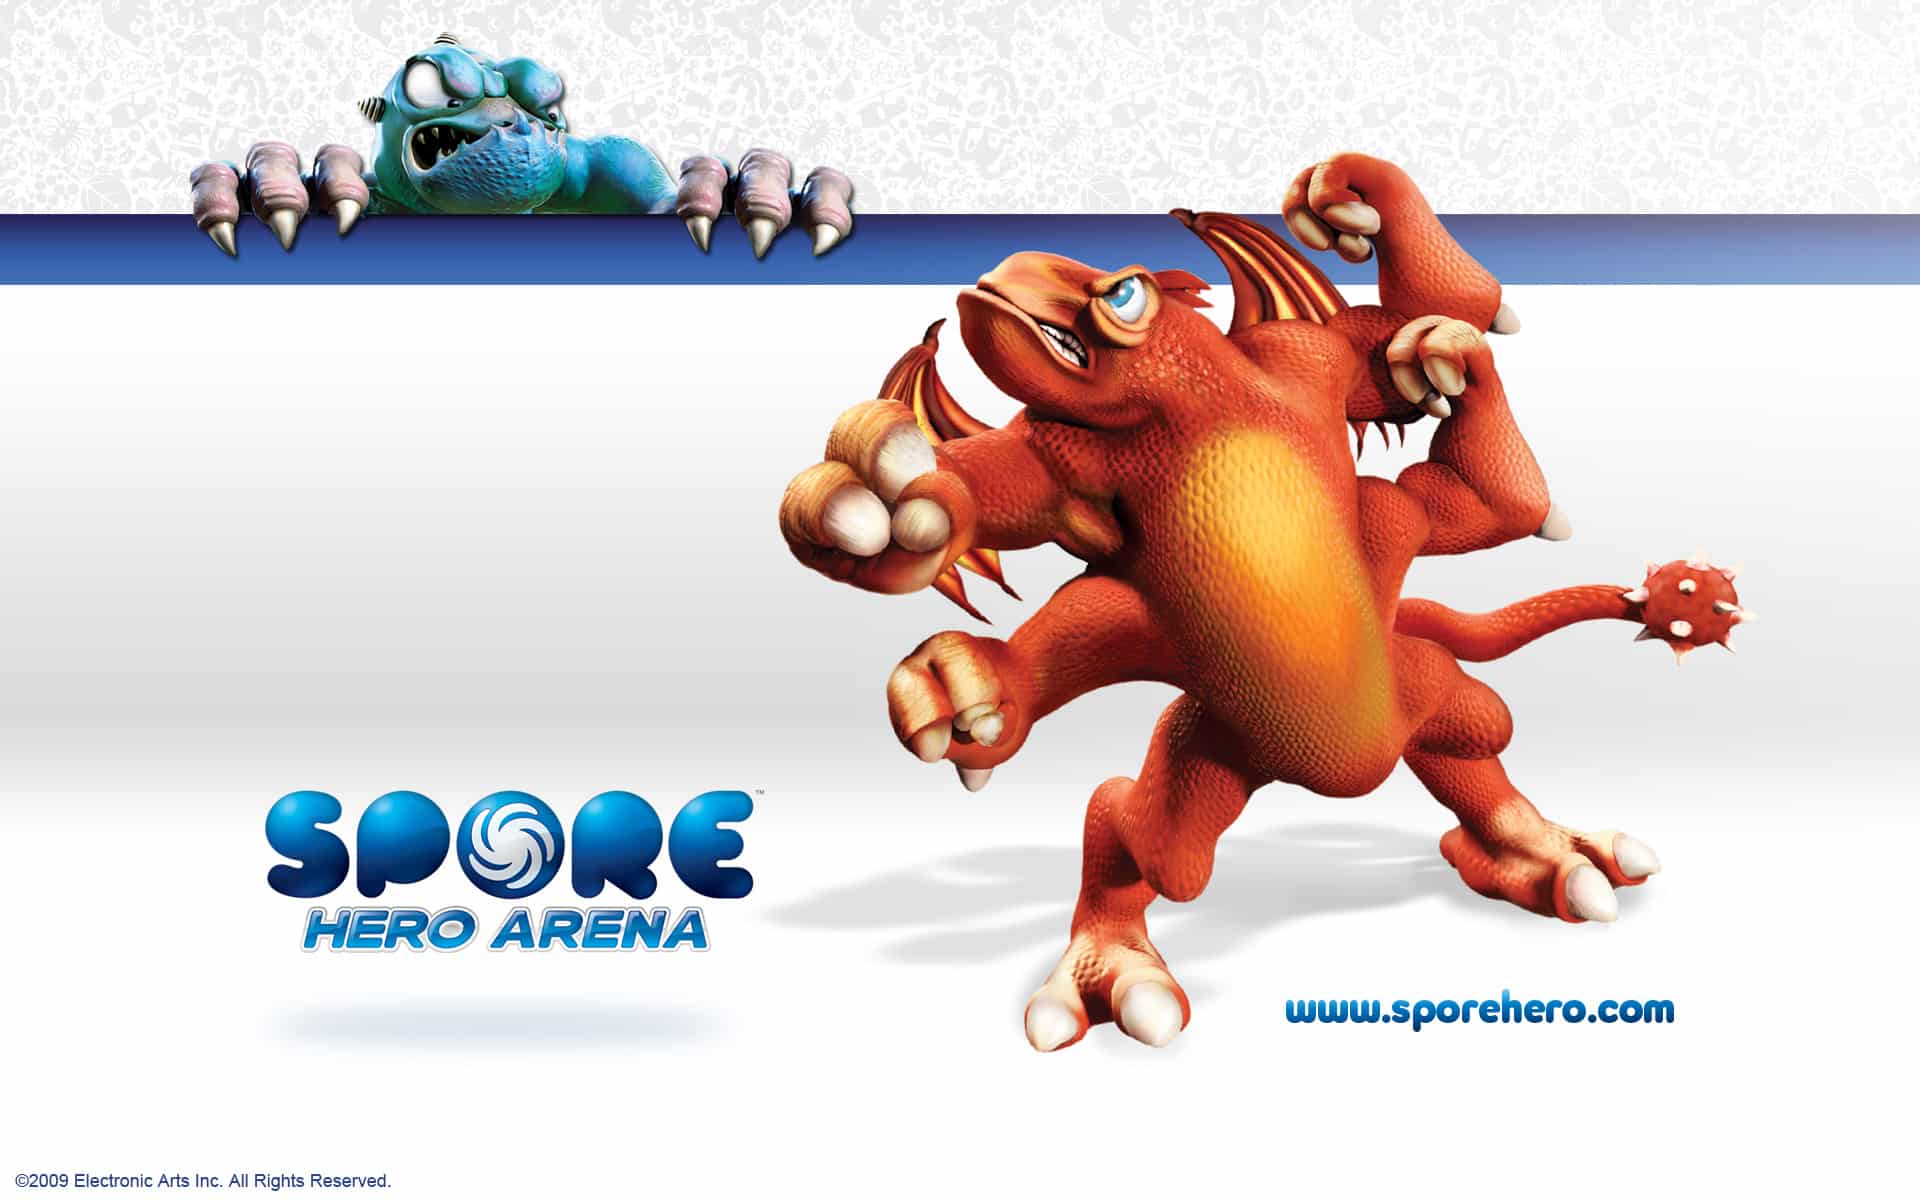 Play Spore For Free